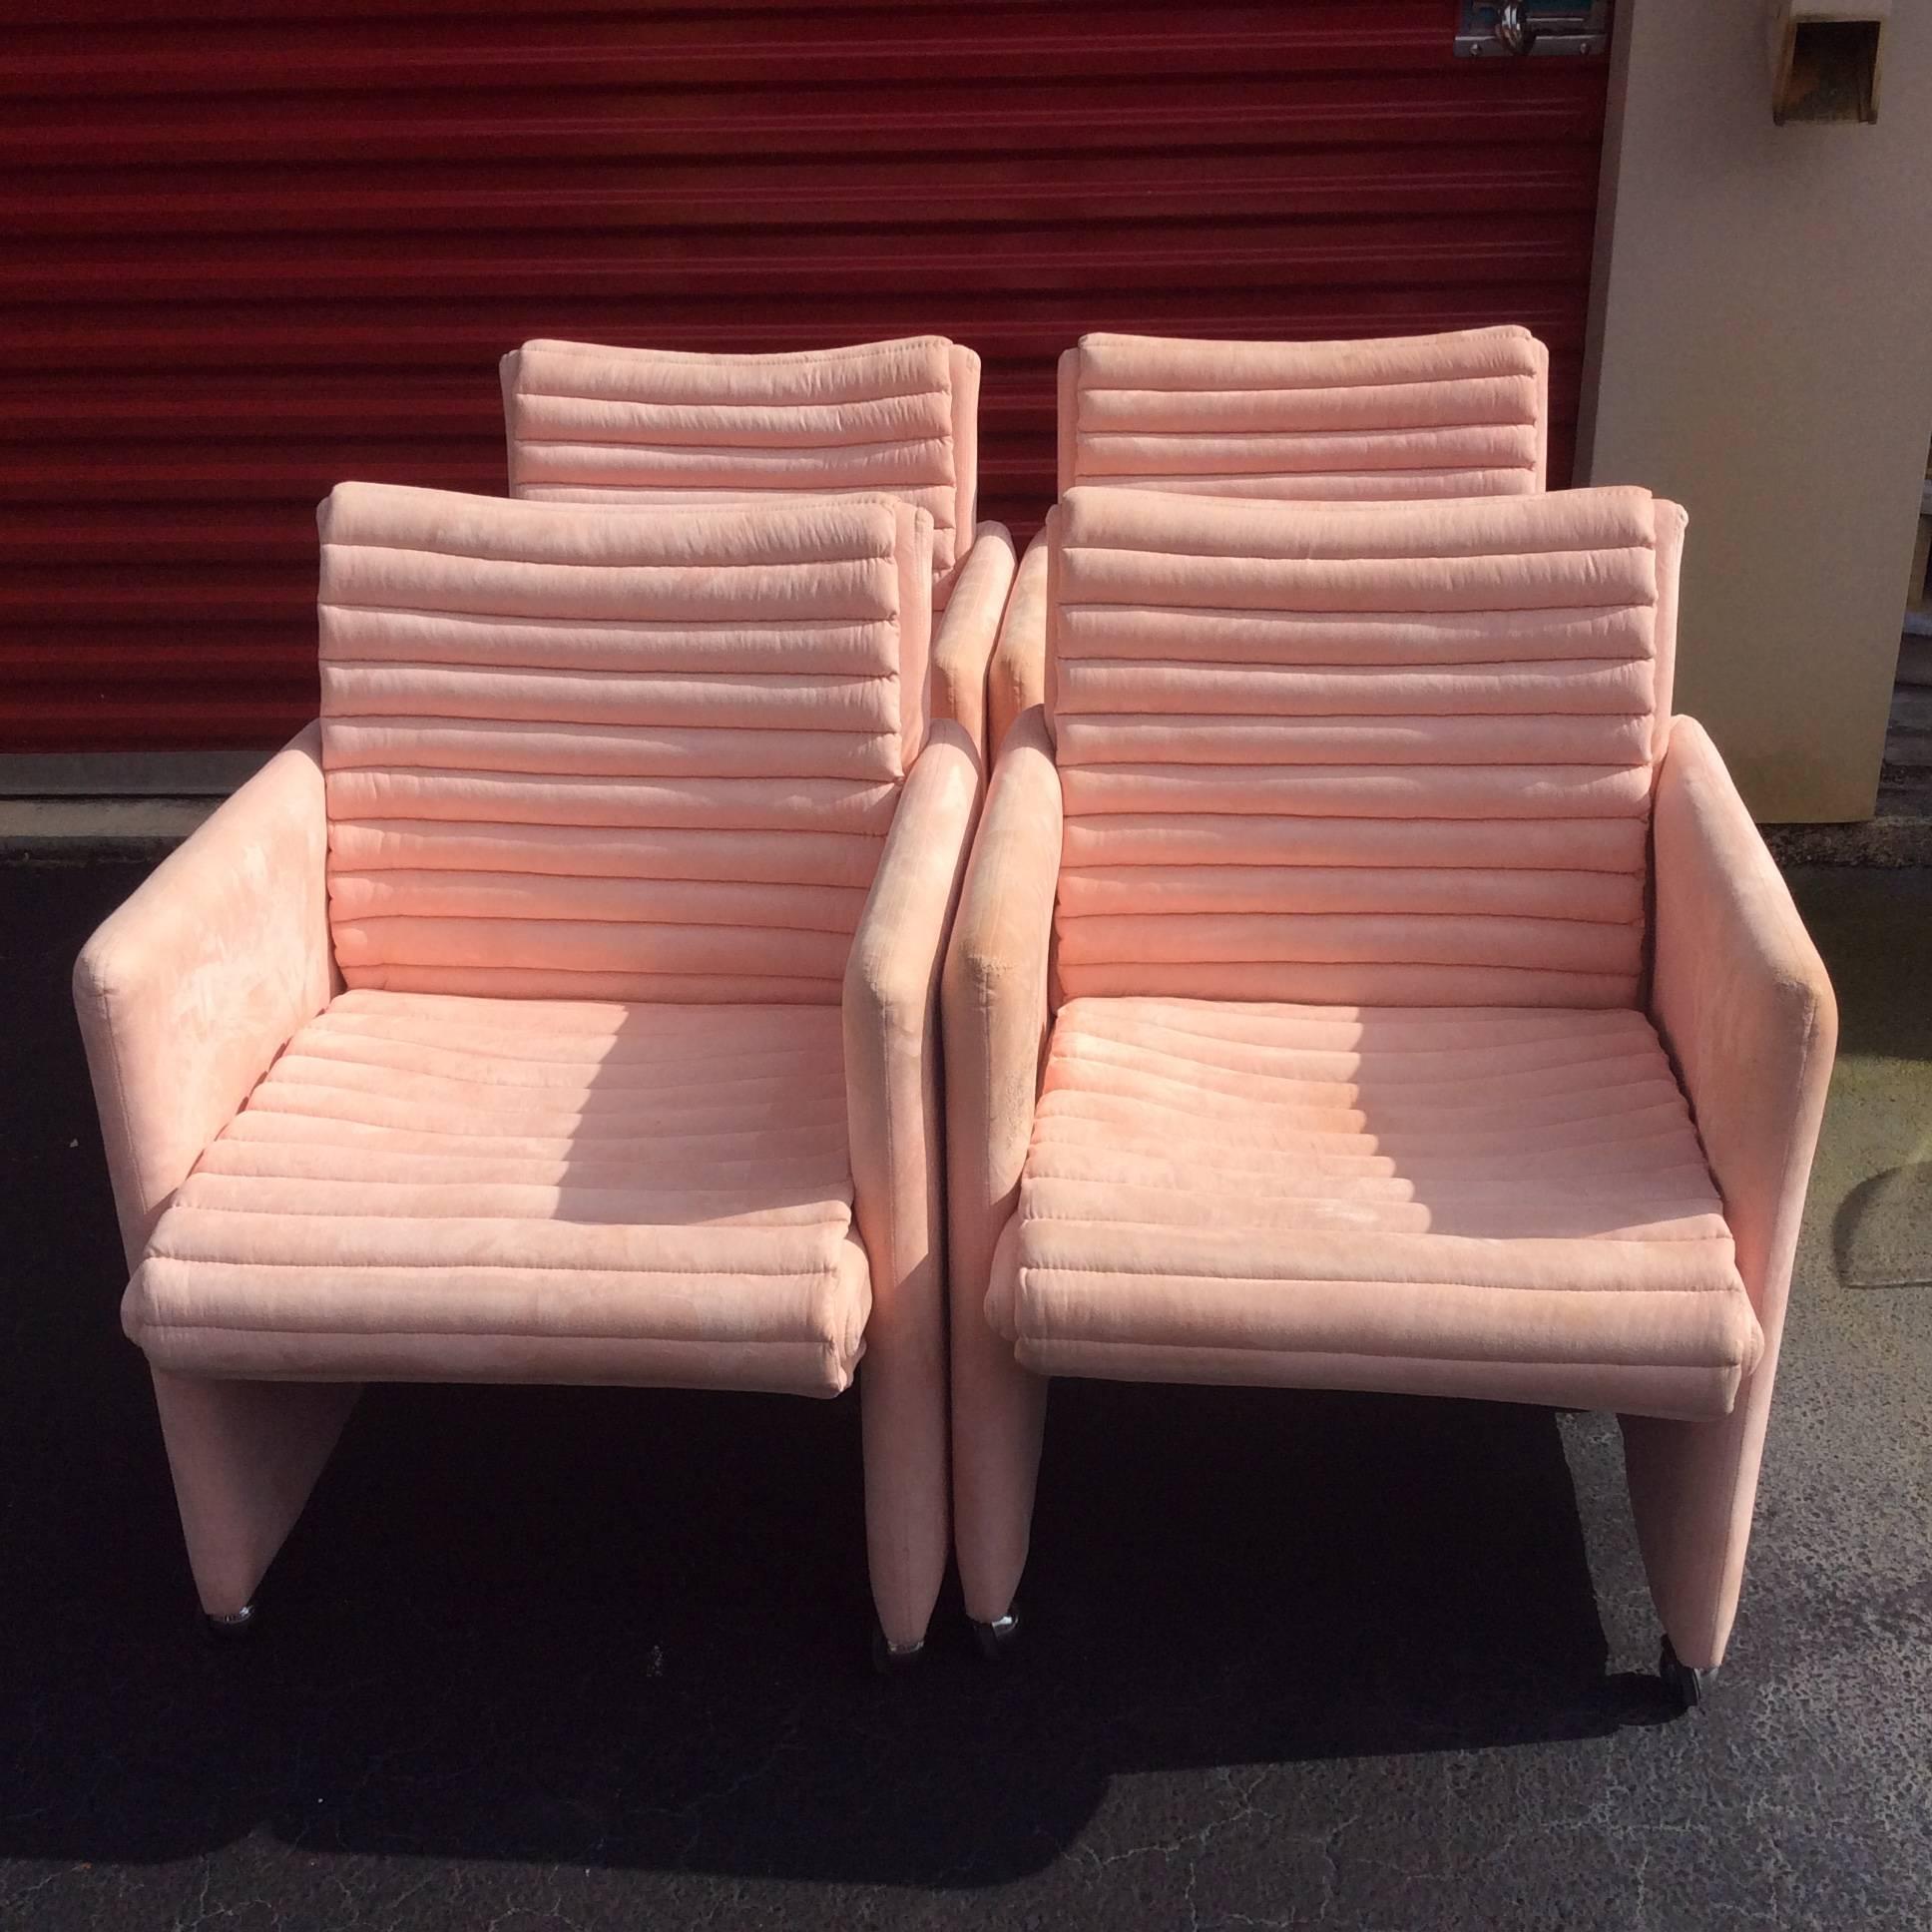 Set of four Hollywood regency Milo Baughman by Preview (tagged) armchairs. Great retro shape!! Original palm beach pink suede fabric does have some soiling and scuffs. I recommend new upholstery however a good steam cleaning may be sufficient in